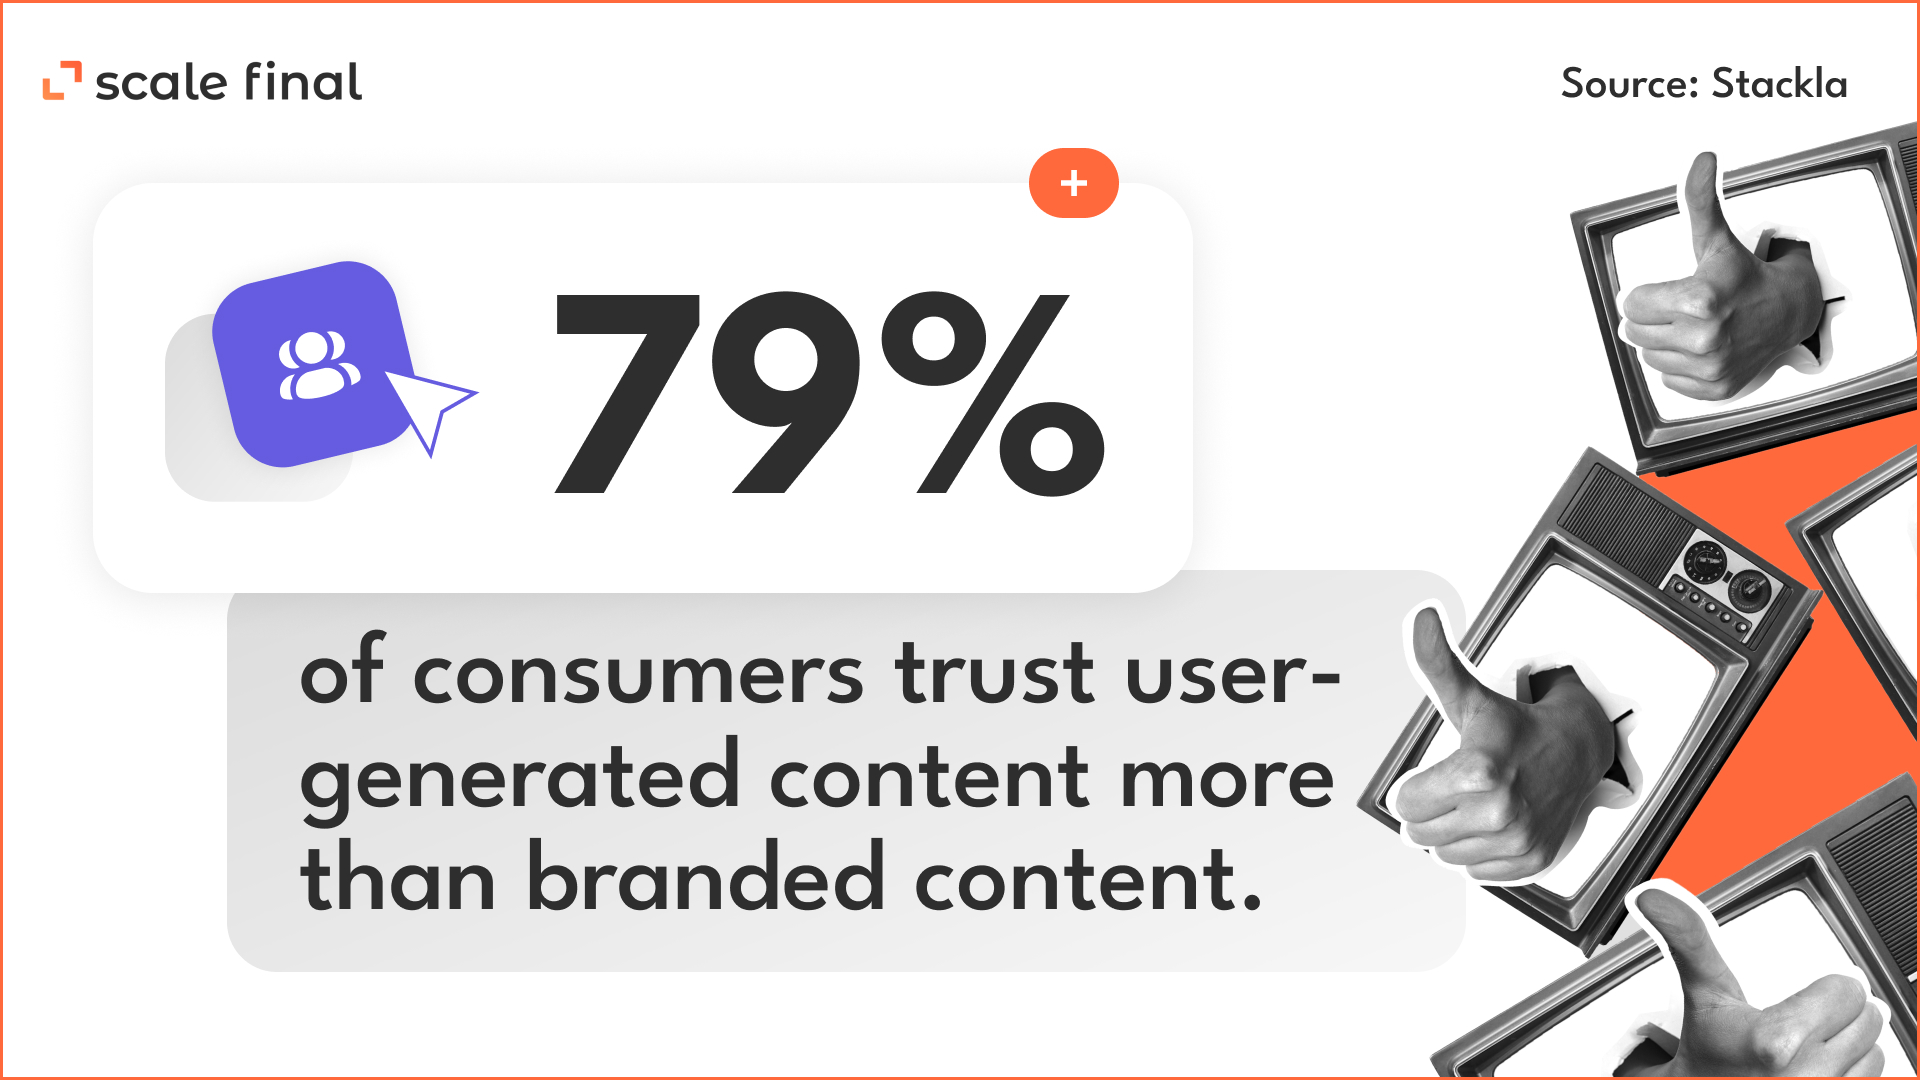  79% of consumers trust user-generated content more than branded content. Source:Stackla